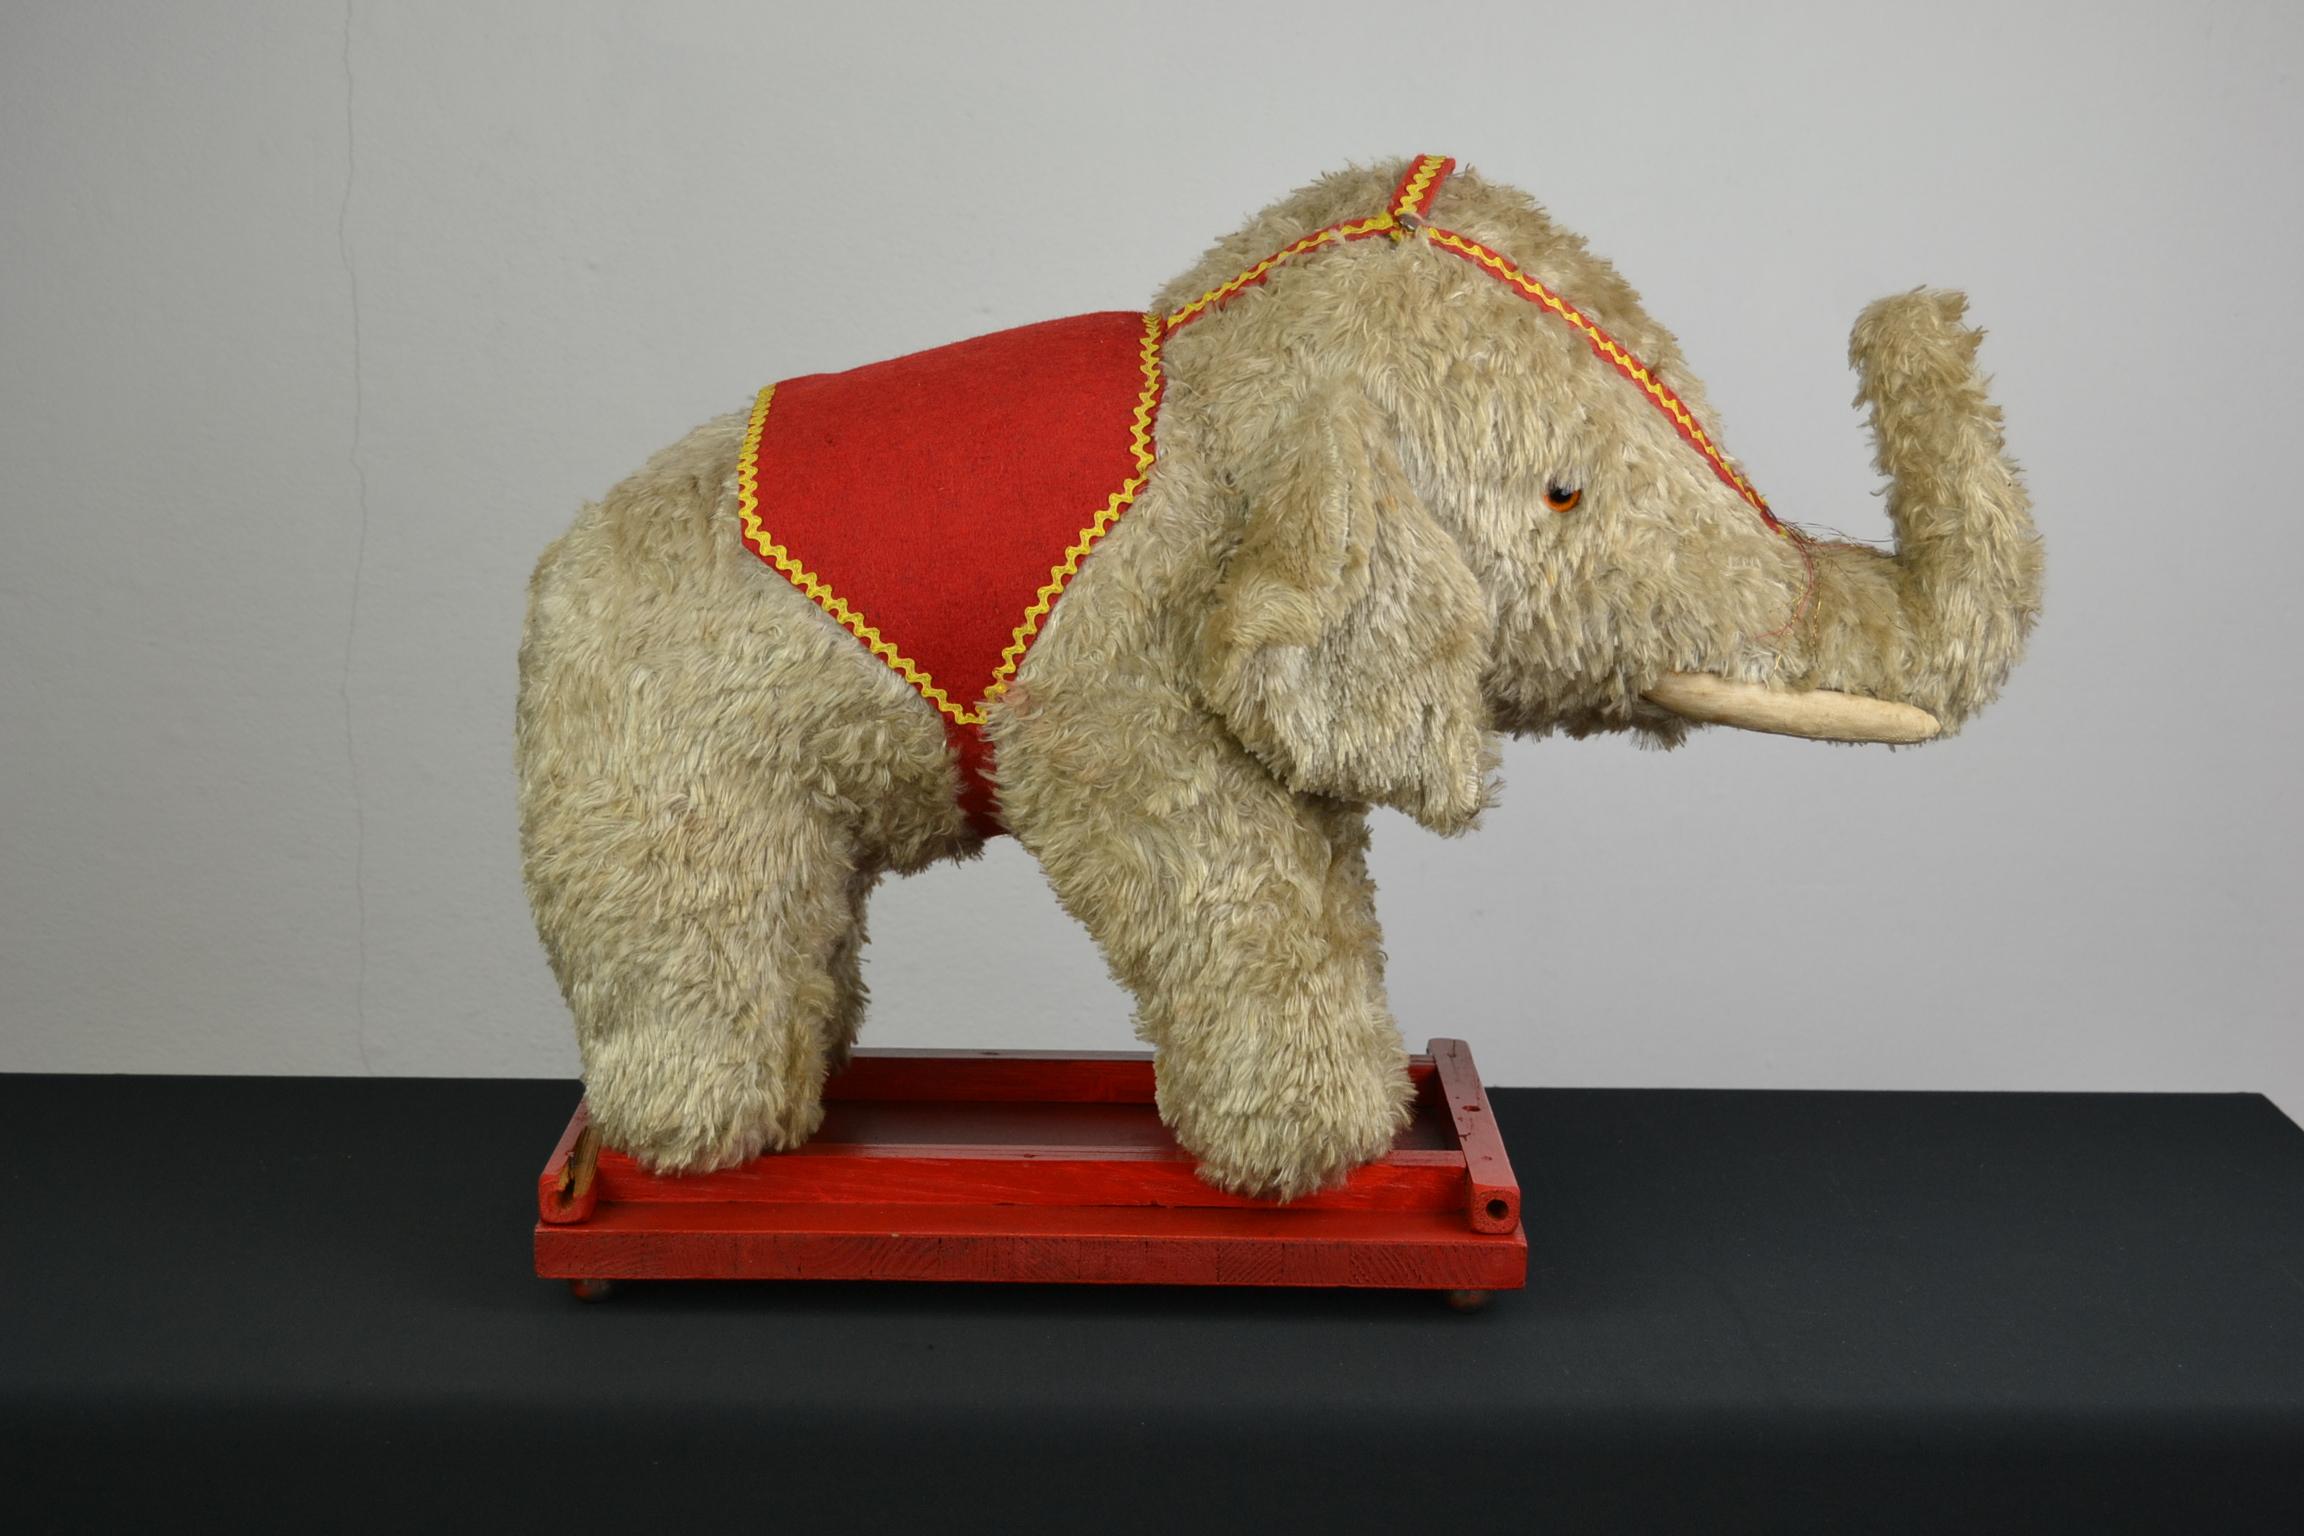 Glass Vintage Stuffed Elephant Toy on Wooden Cart with Wheels, 1960s For Sale